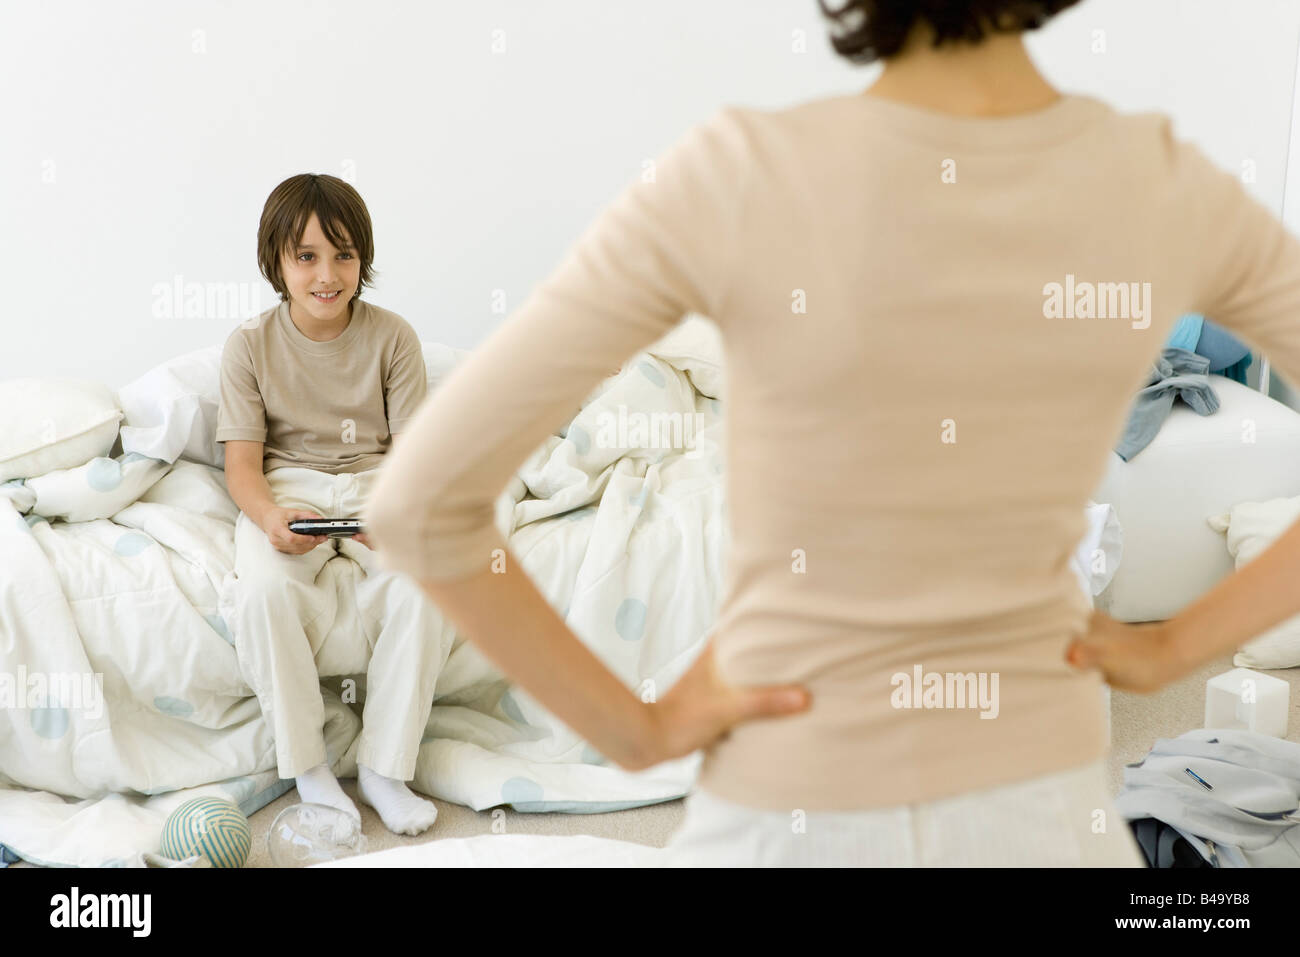 Boy playing handheld video game in messy bedroom, mother standing in foreground with hands on hips Stock Photo